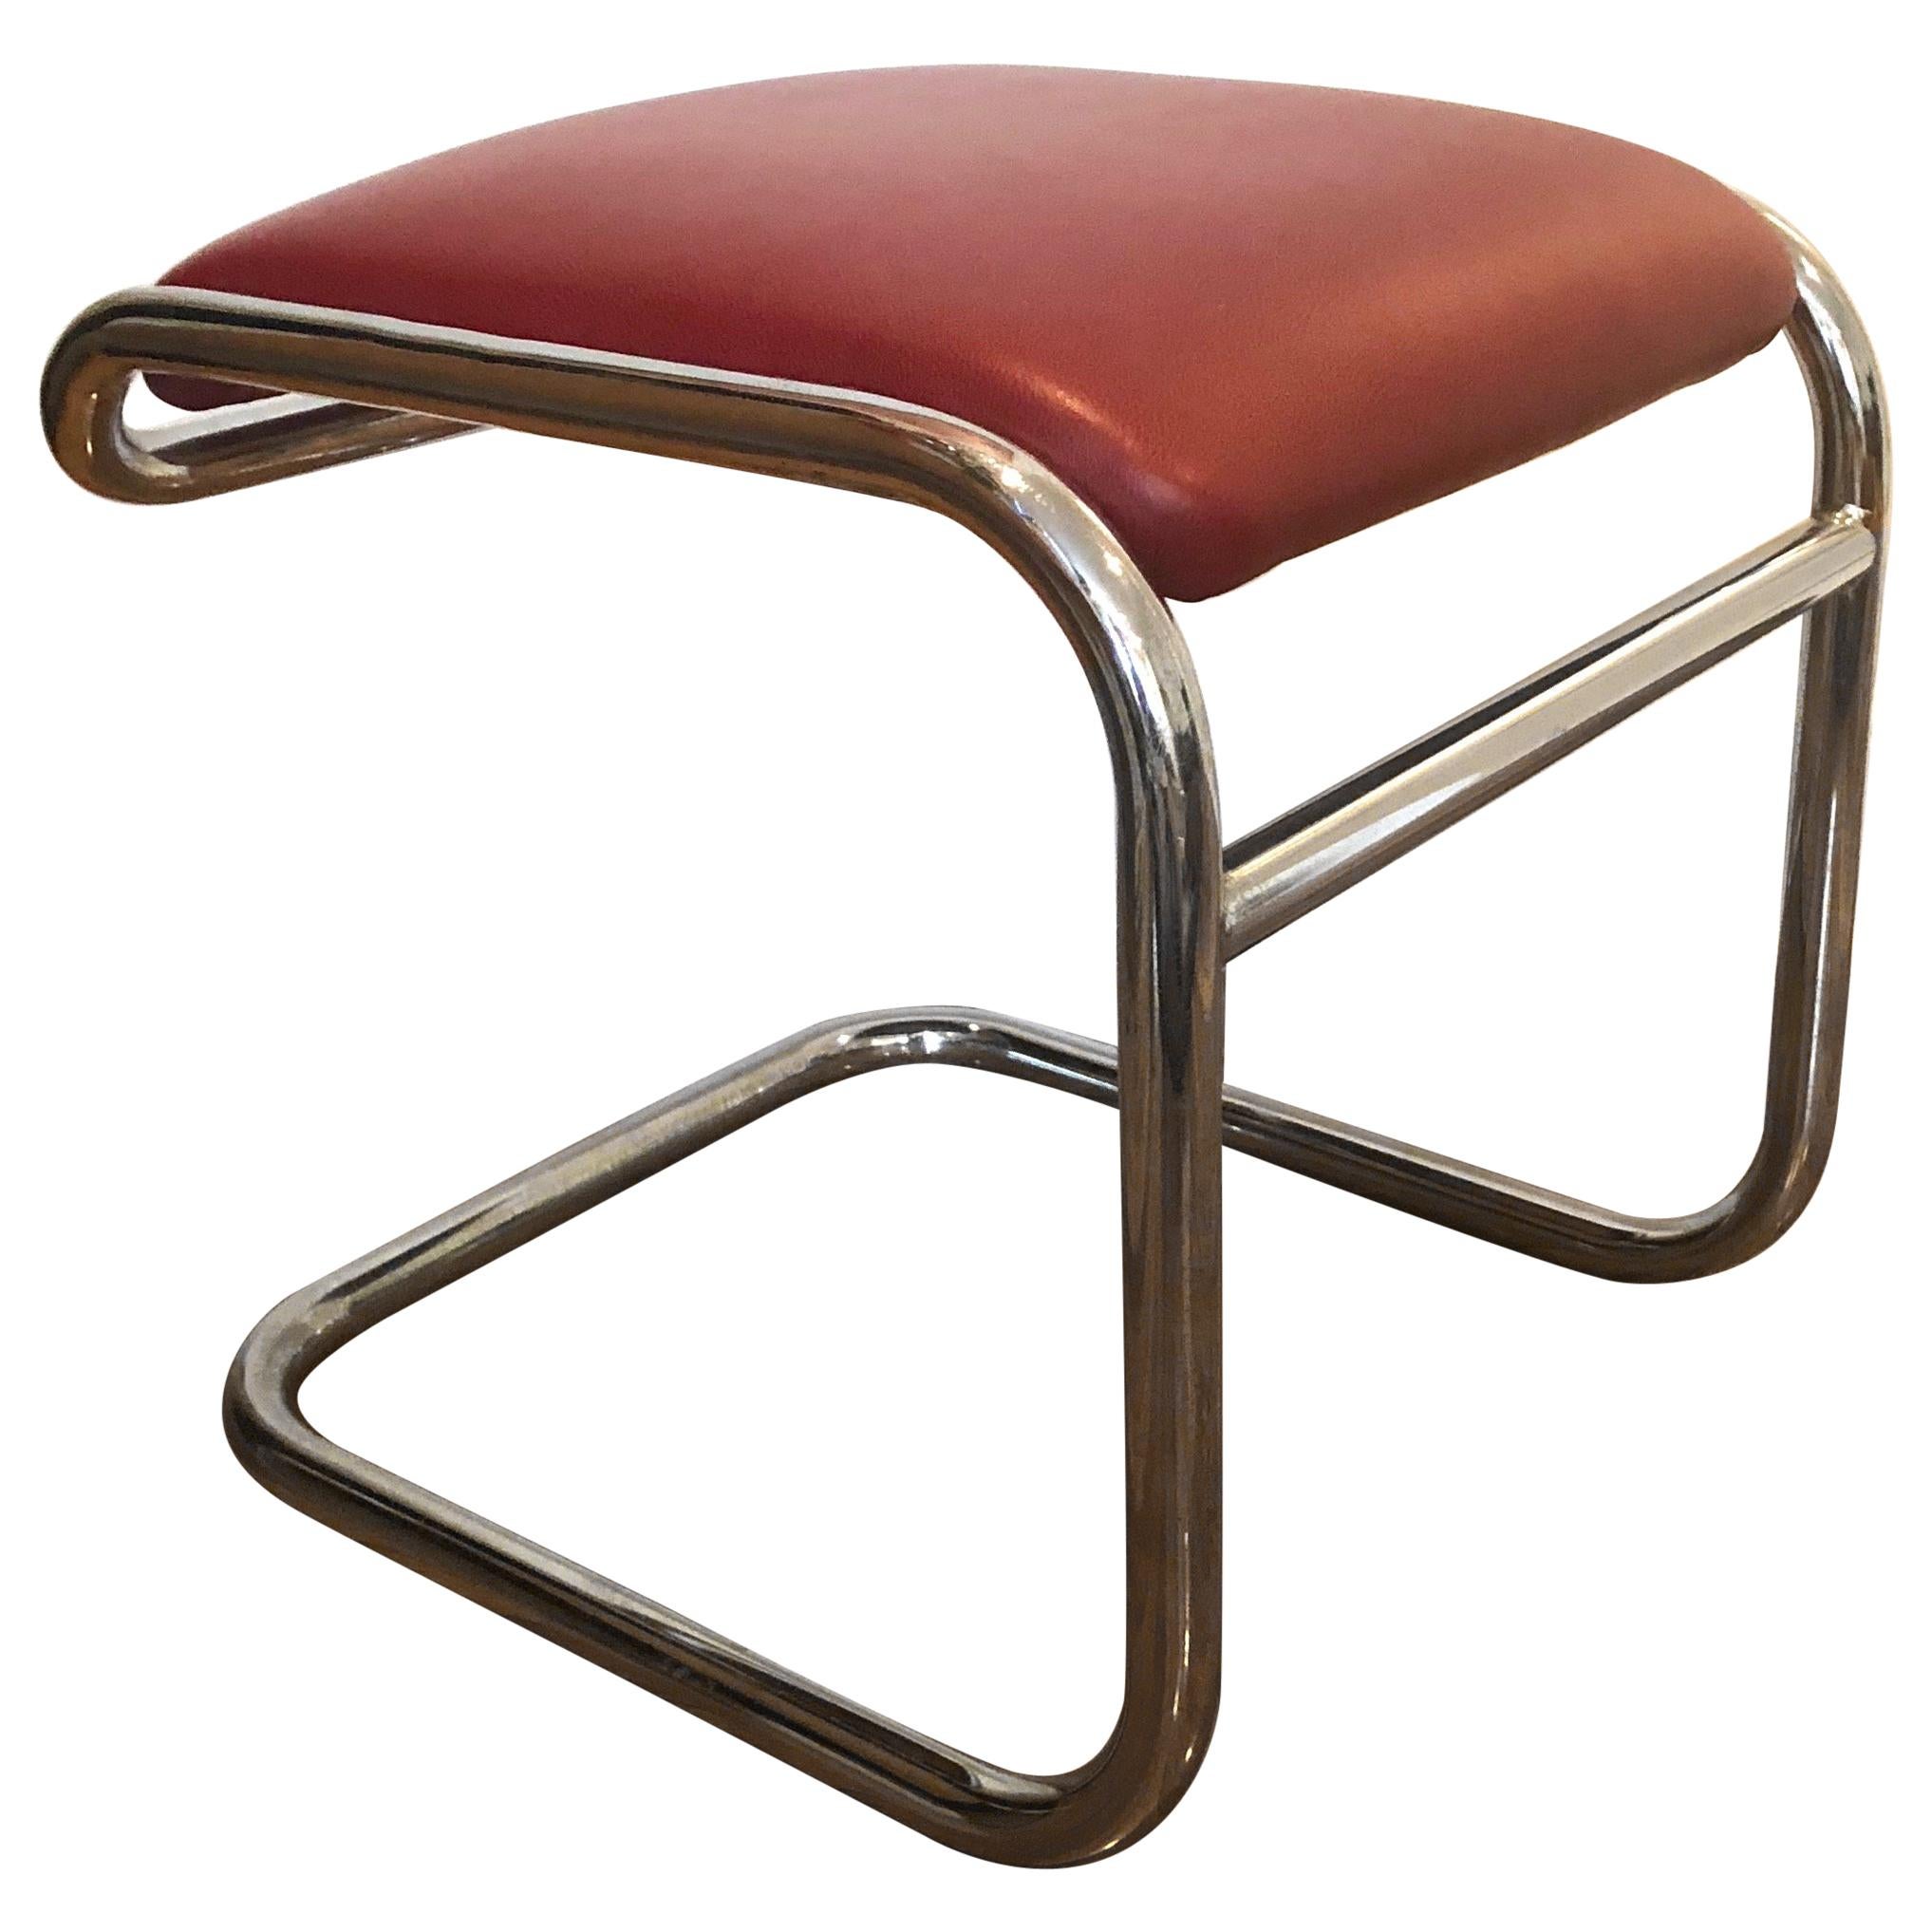 Pair of tubular chromed metal footstools with a horizontal stretcher and red leatherette upholstered seats.